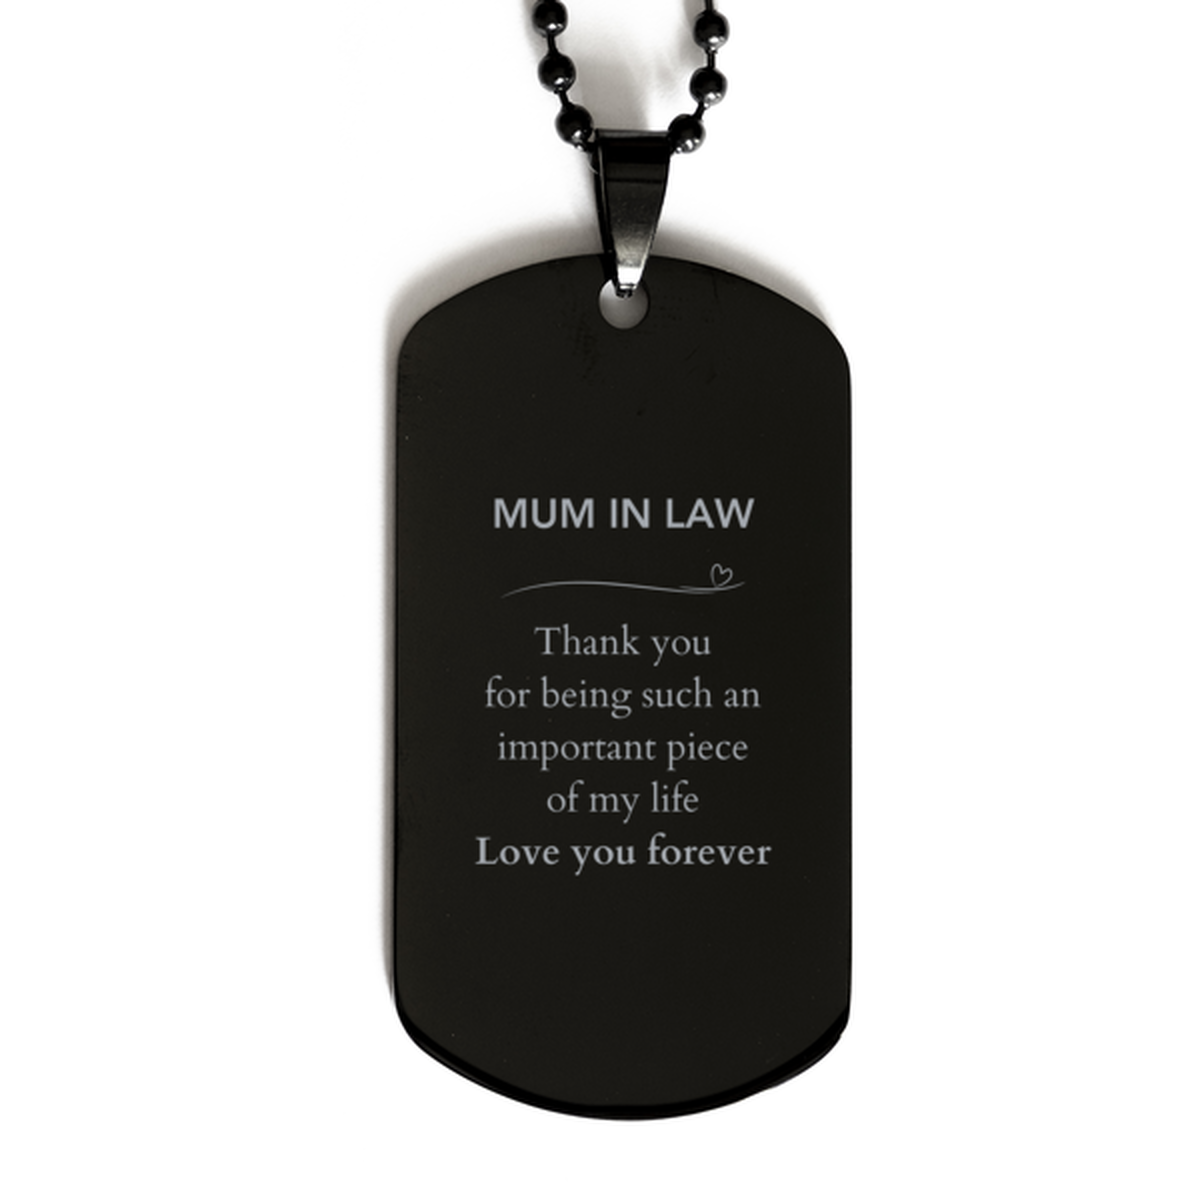 Appropriate Mum In Law  Black Dog Tag Epic Birthday Gifts for Mum In Law  Thank you for being such an important piece of my life Mum In Law  Christmas Mothers Fathers Day